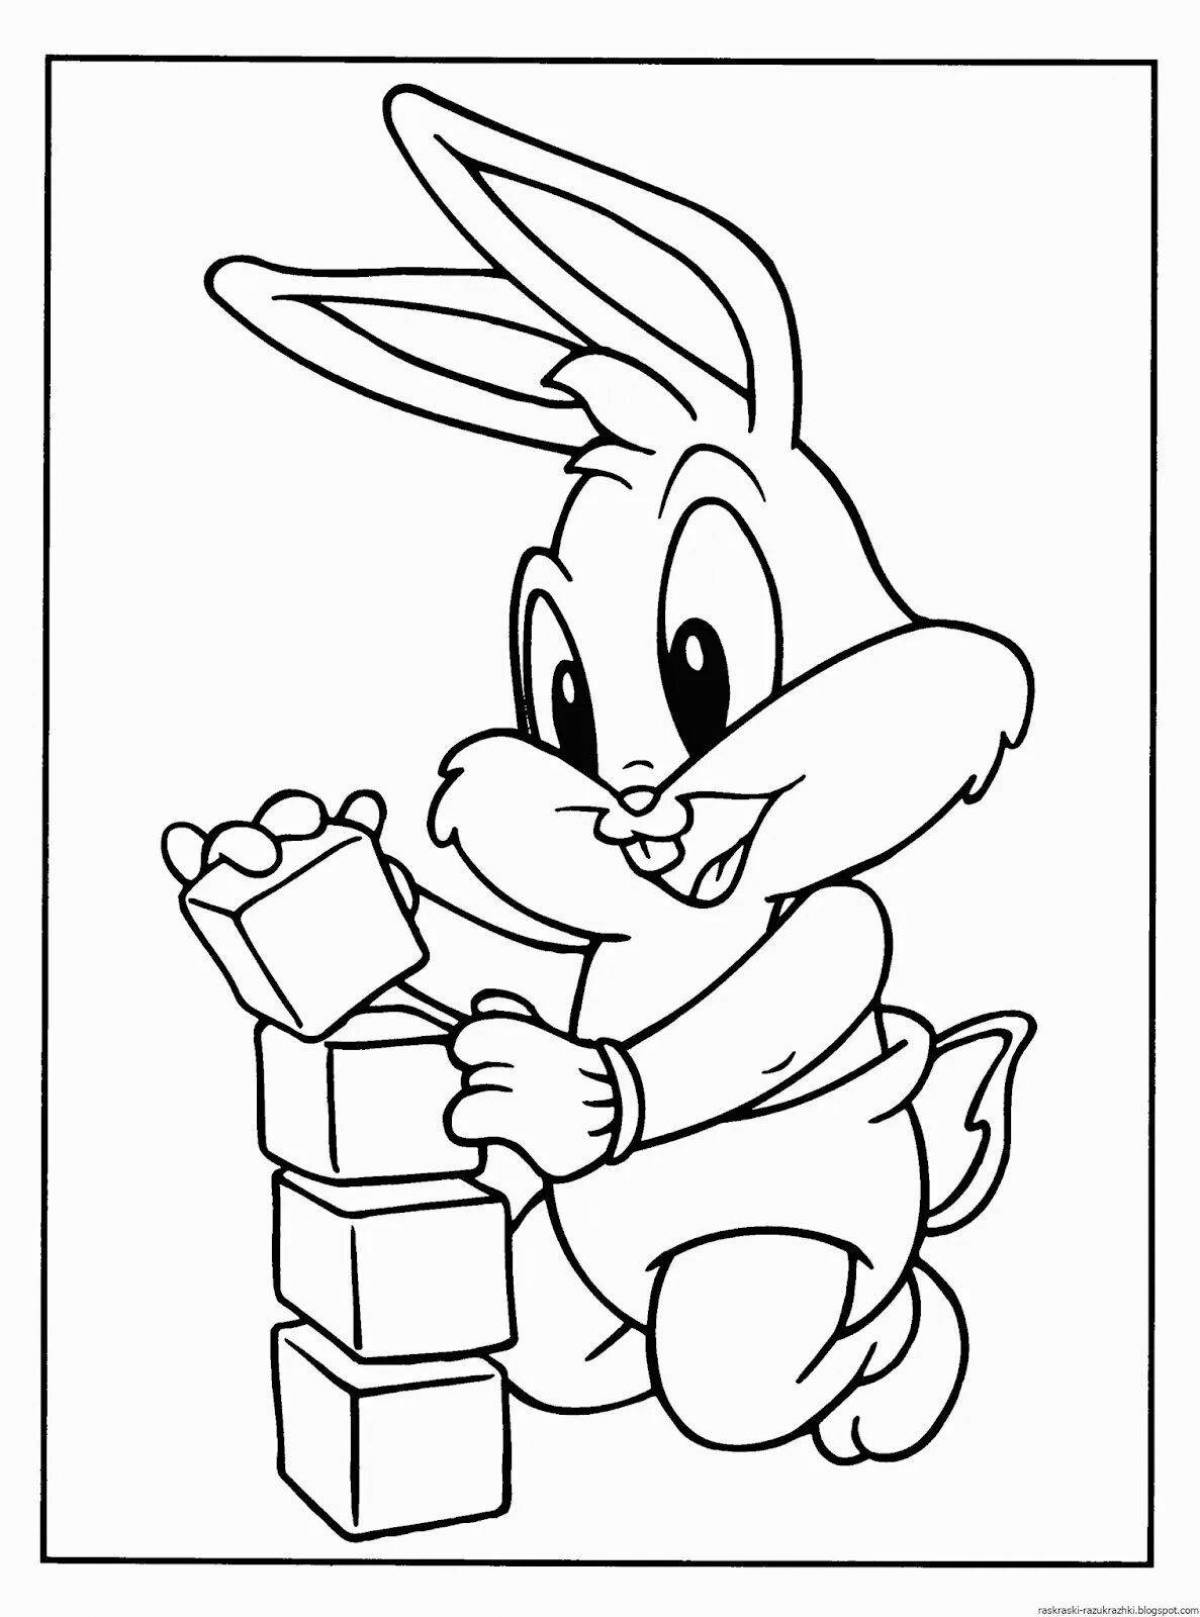 Coloring book with adorable cartoon characters for 5-6 year olds